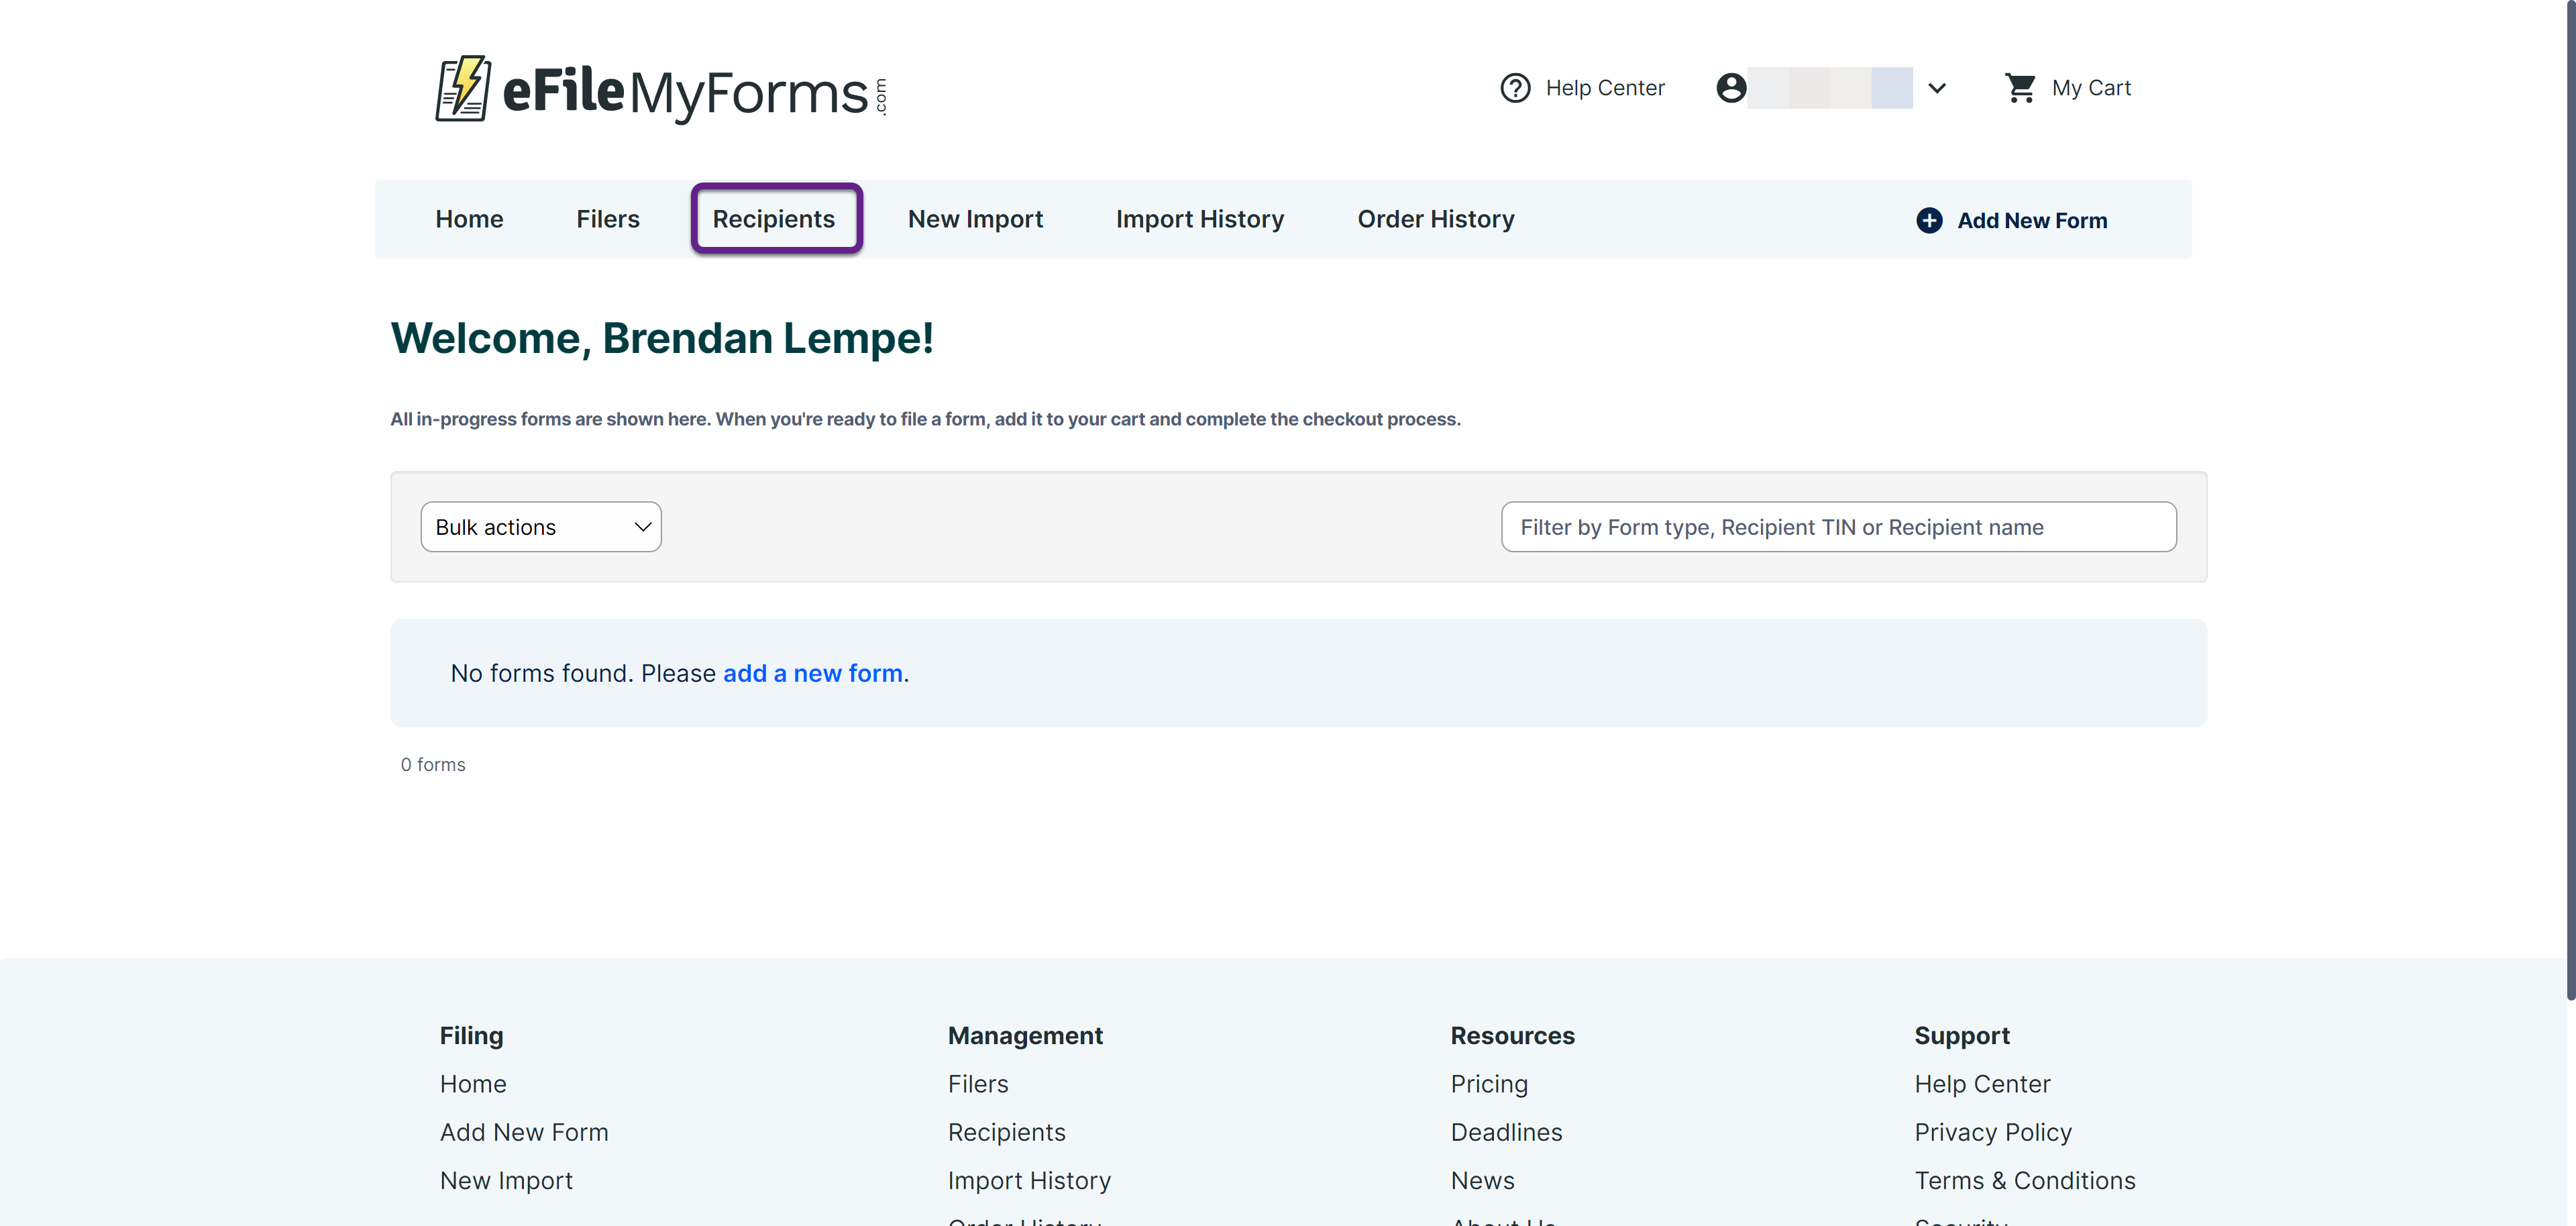 Image of the eFileMyForms home page with a callout on the Recipients button.